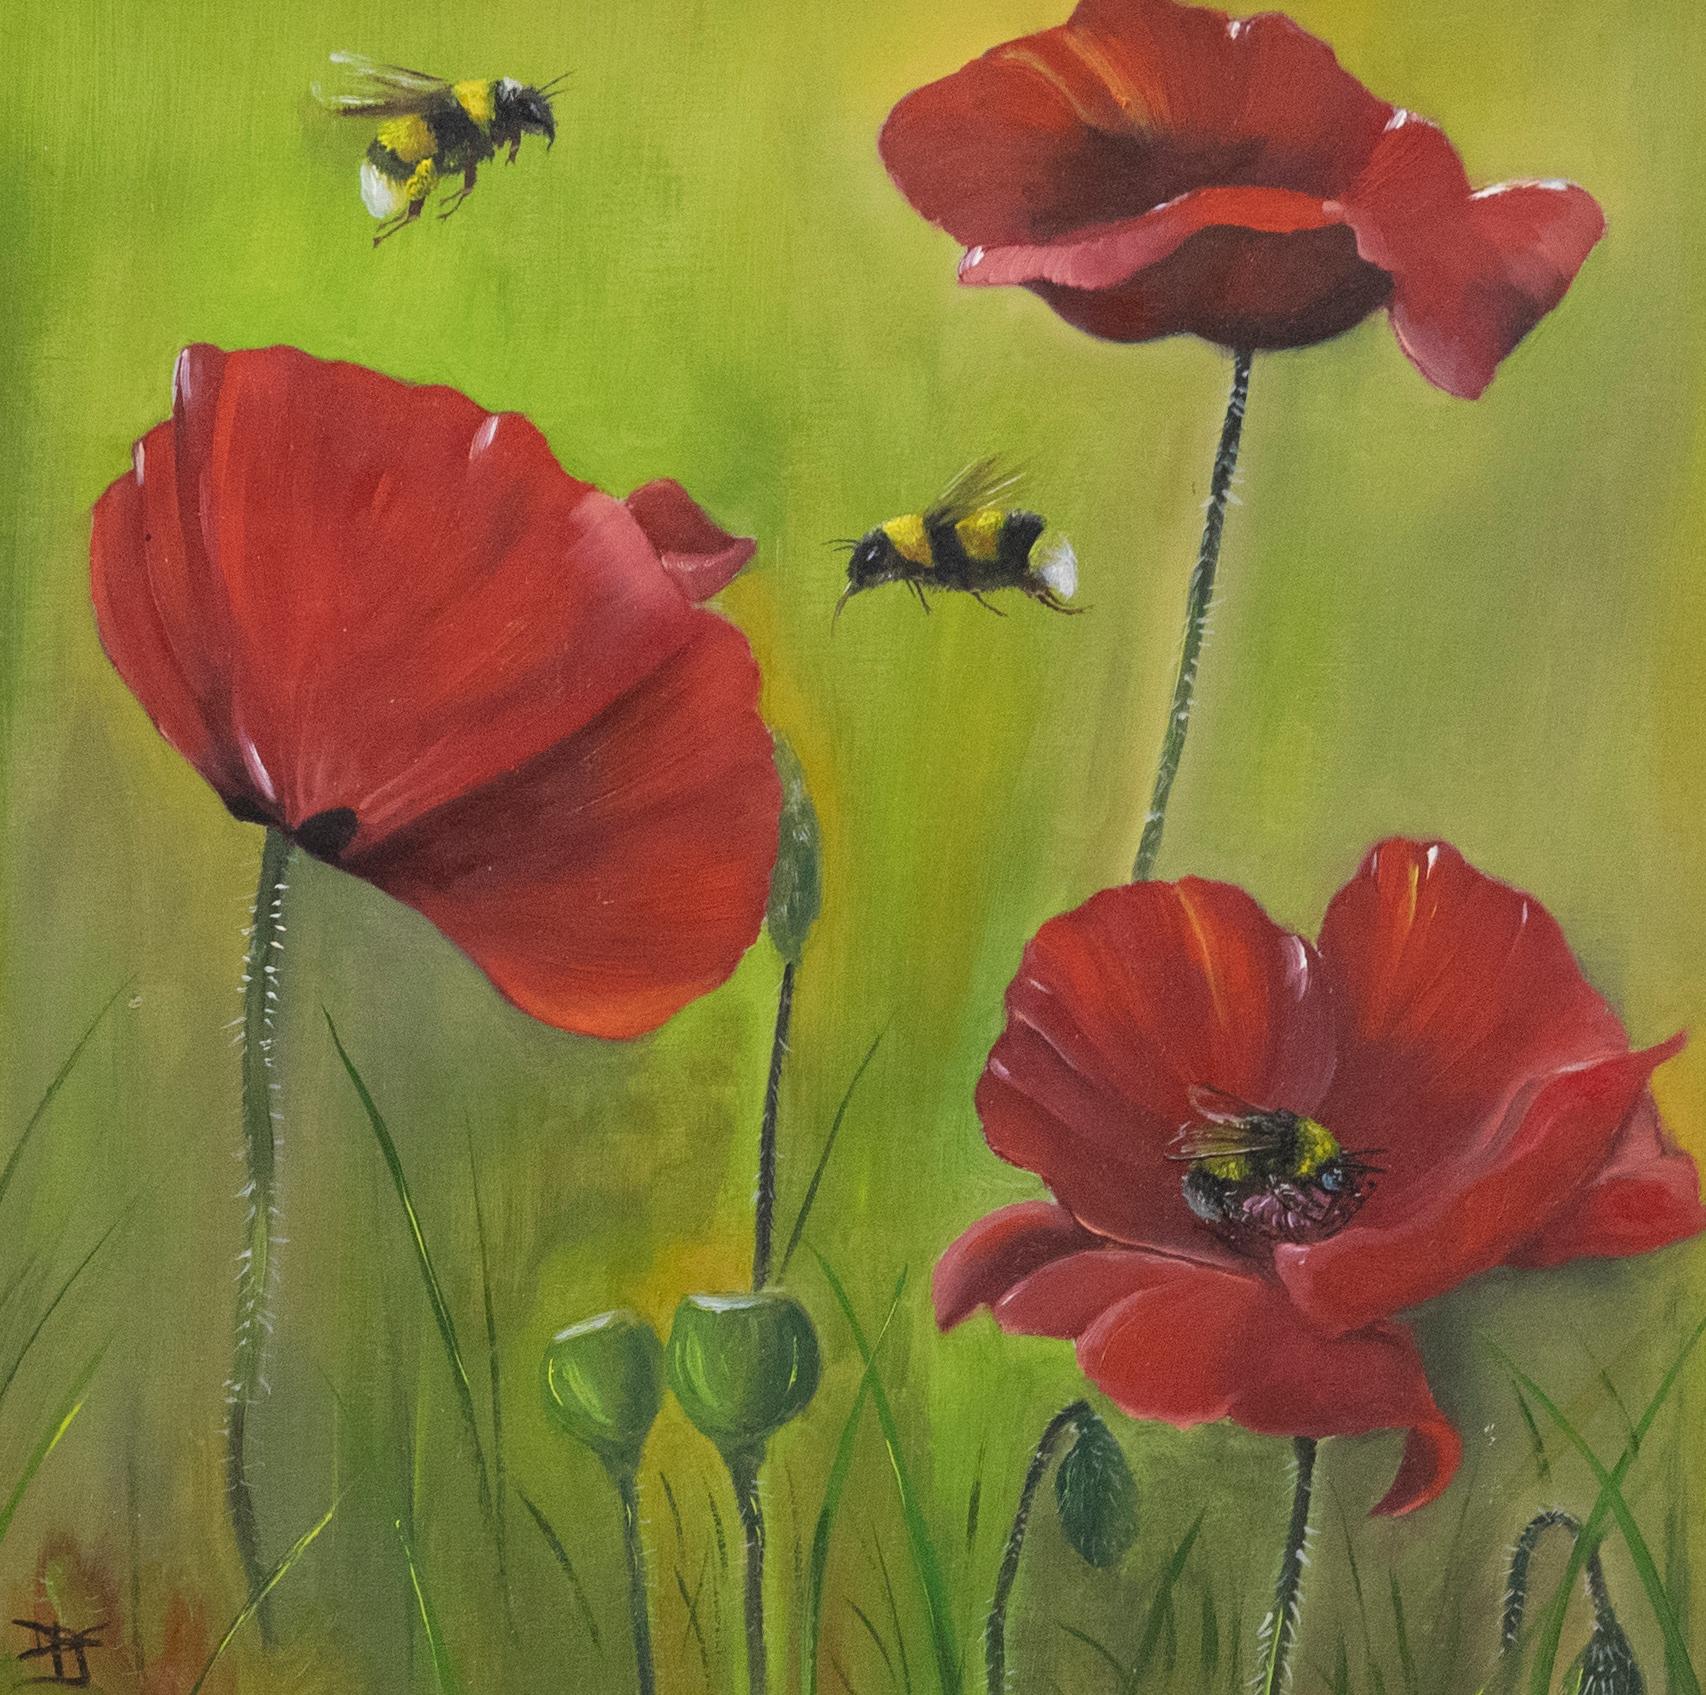 Vivek Mandalia - Framed Contemporary Oil, Bumble Bee's & Poppies - Painting by Unknown